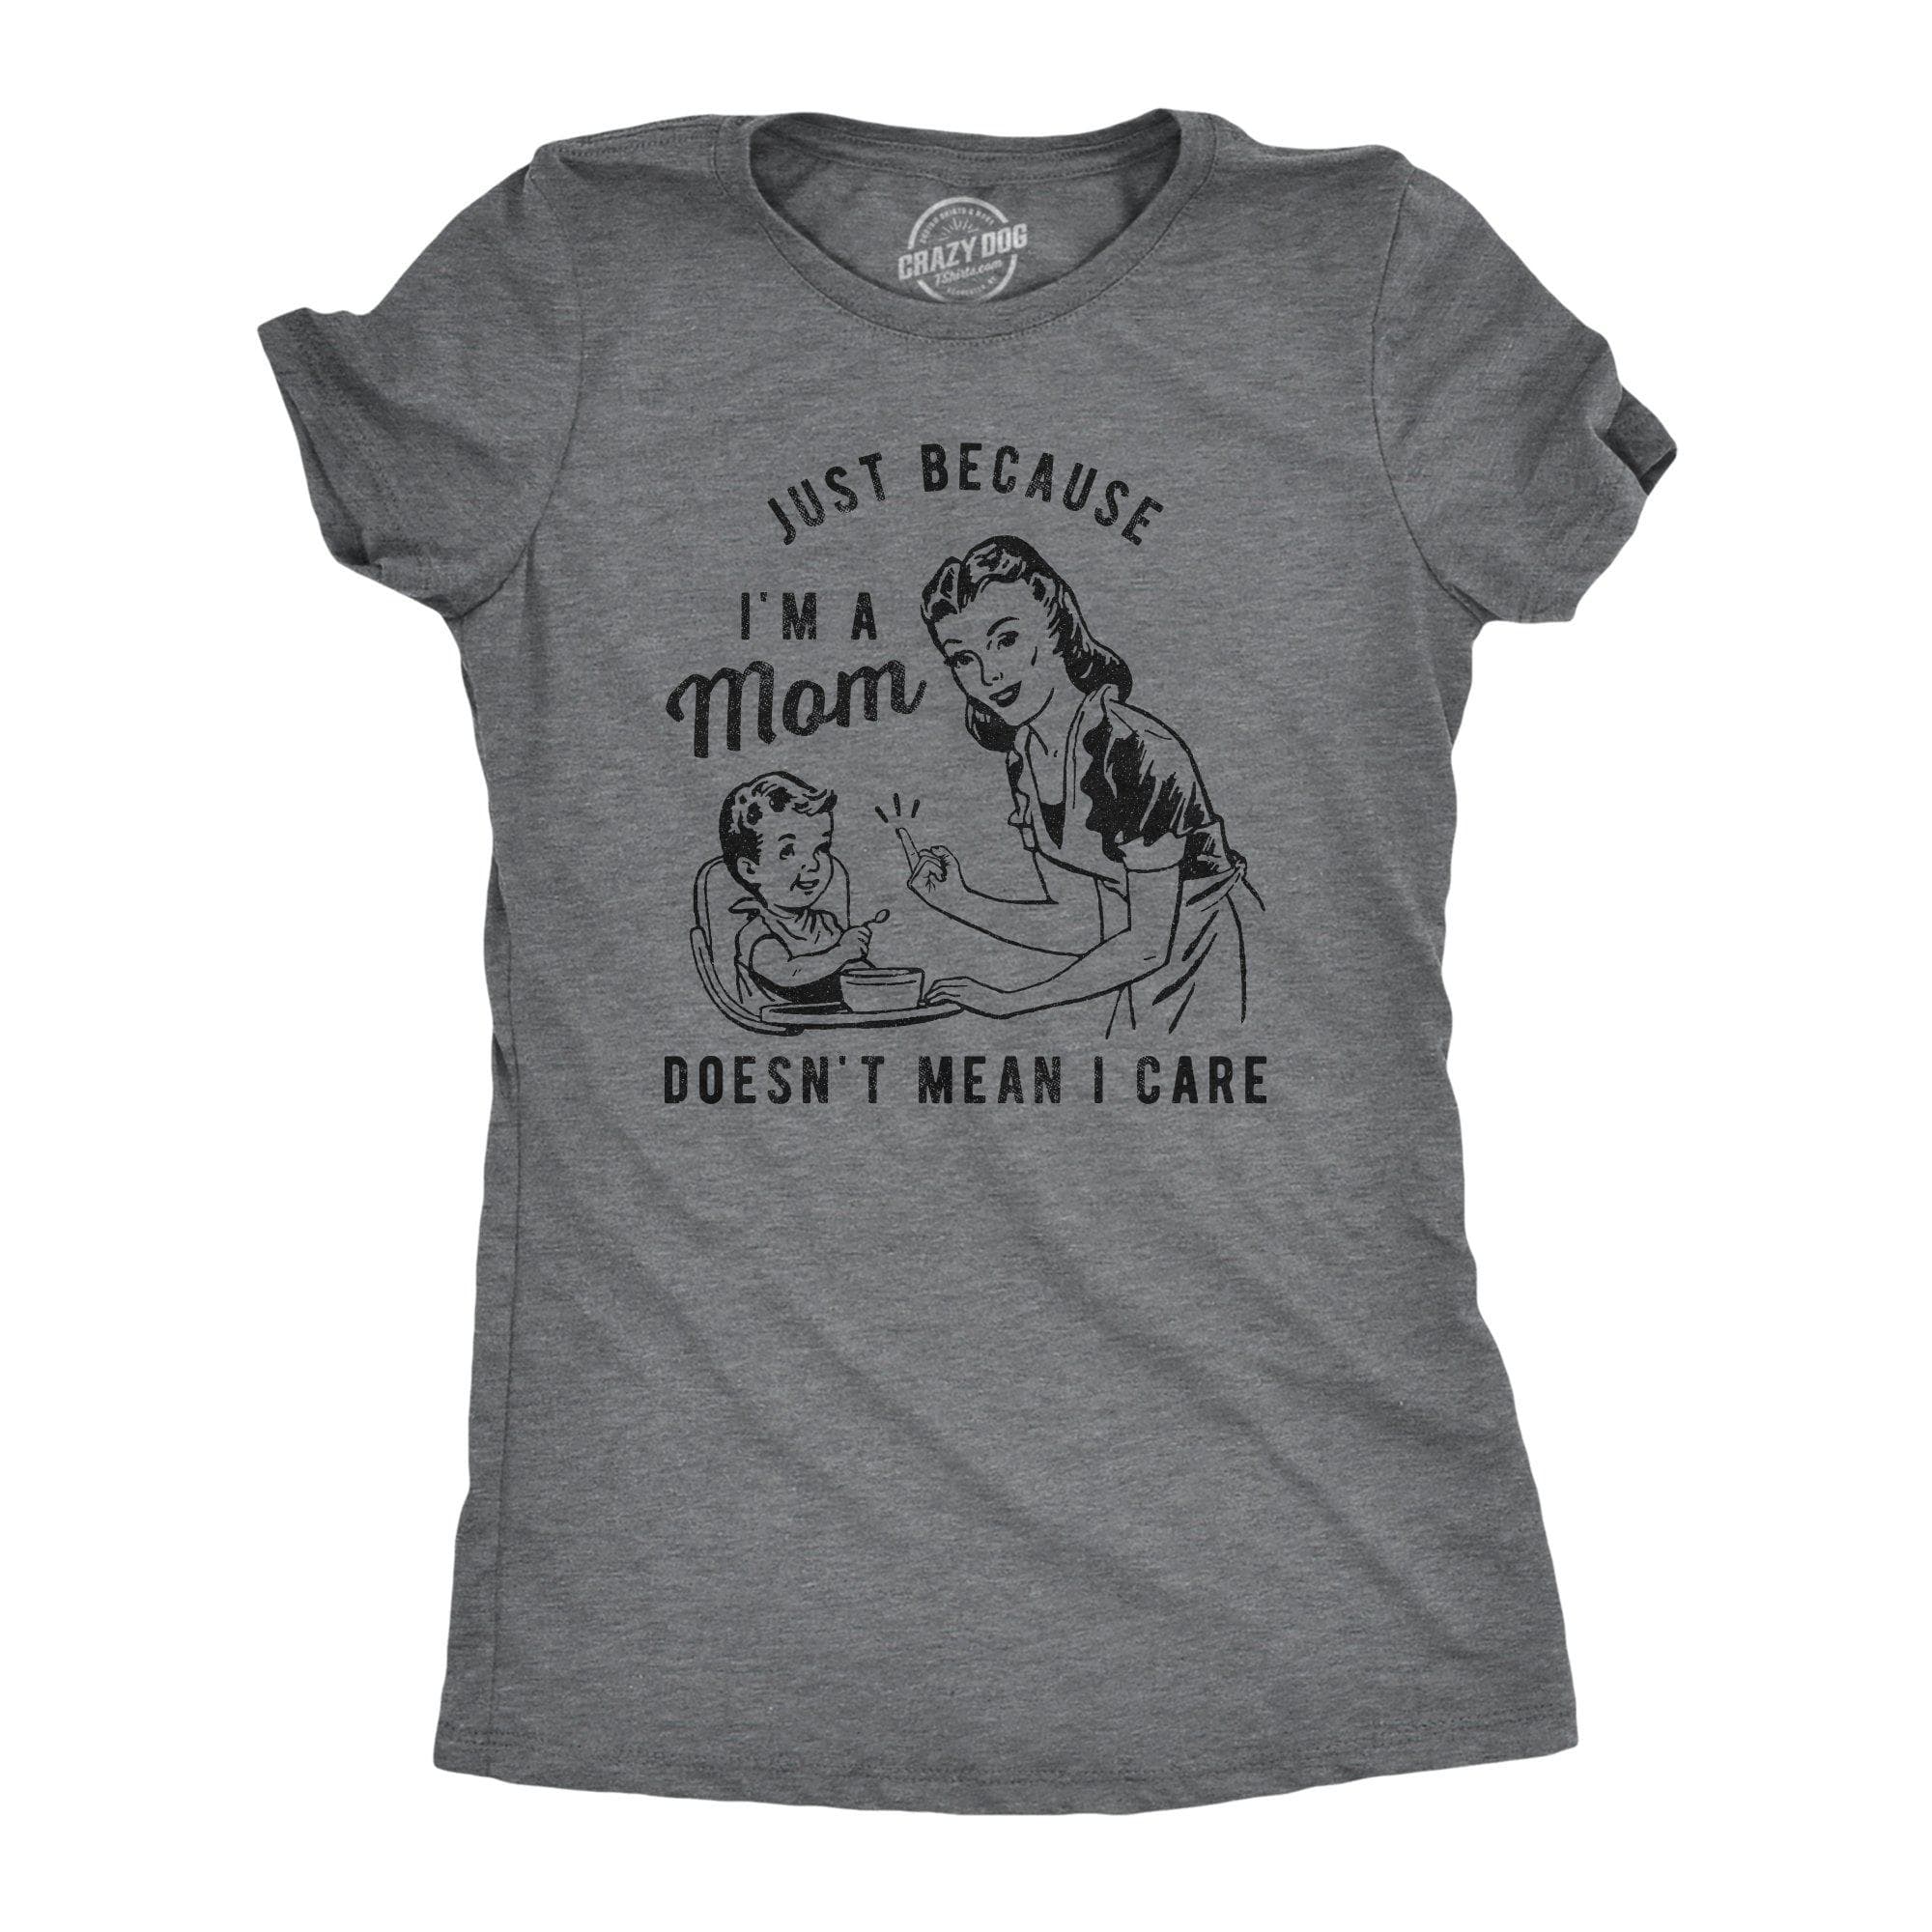 Just Because I'm A Mom Doesn't Mean I Care Women's Tshirt - Crazy Dog T-Shirts